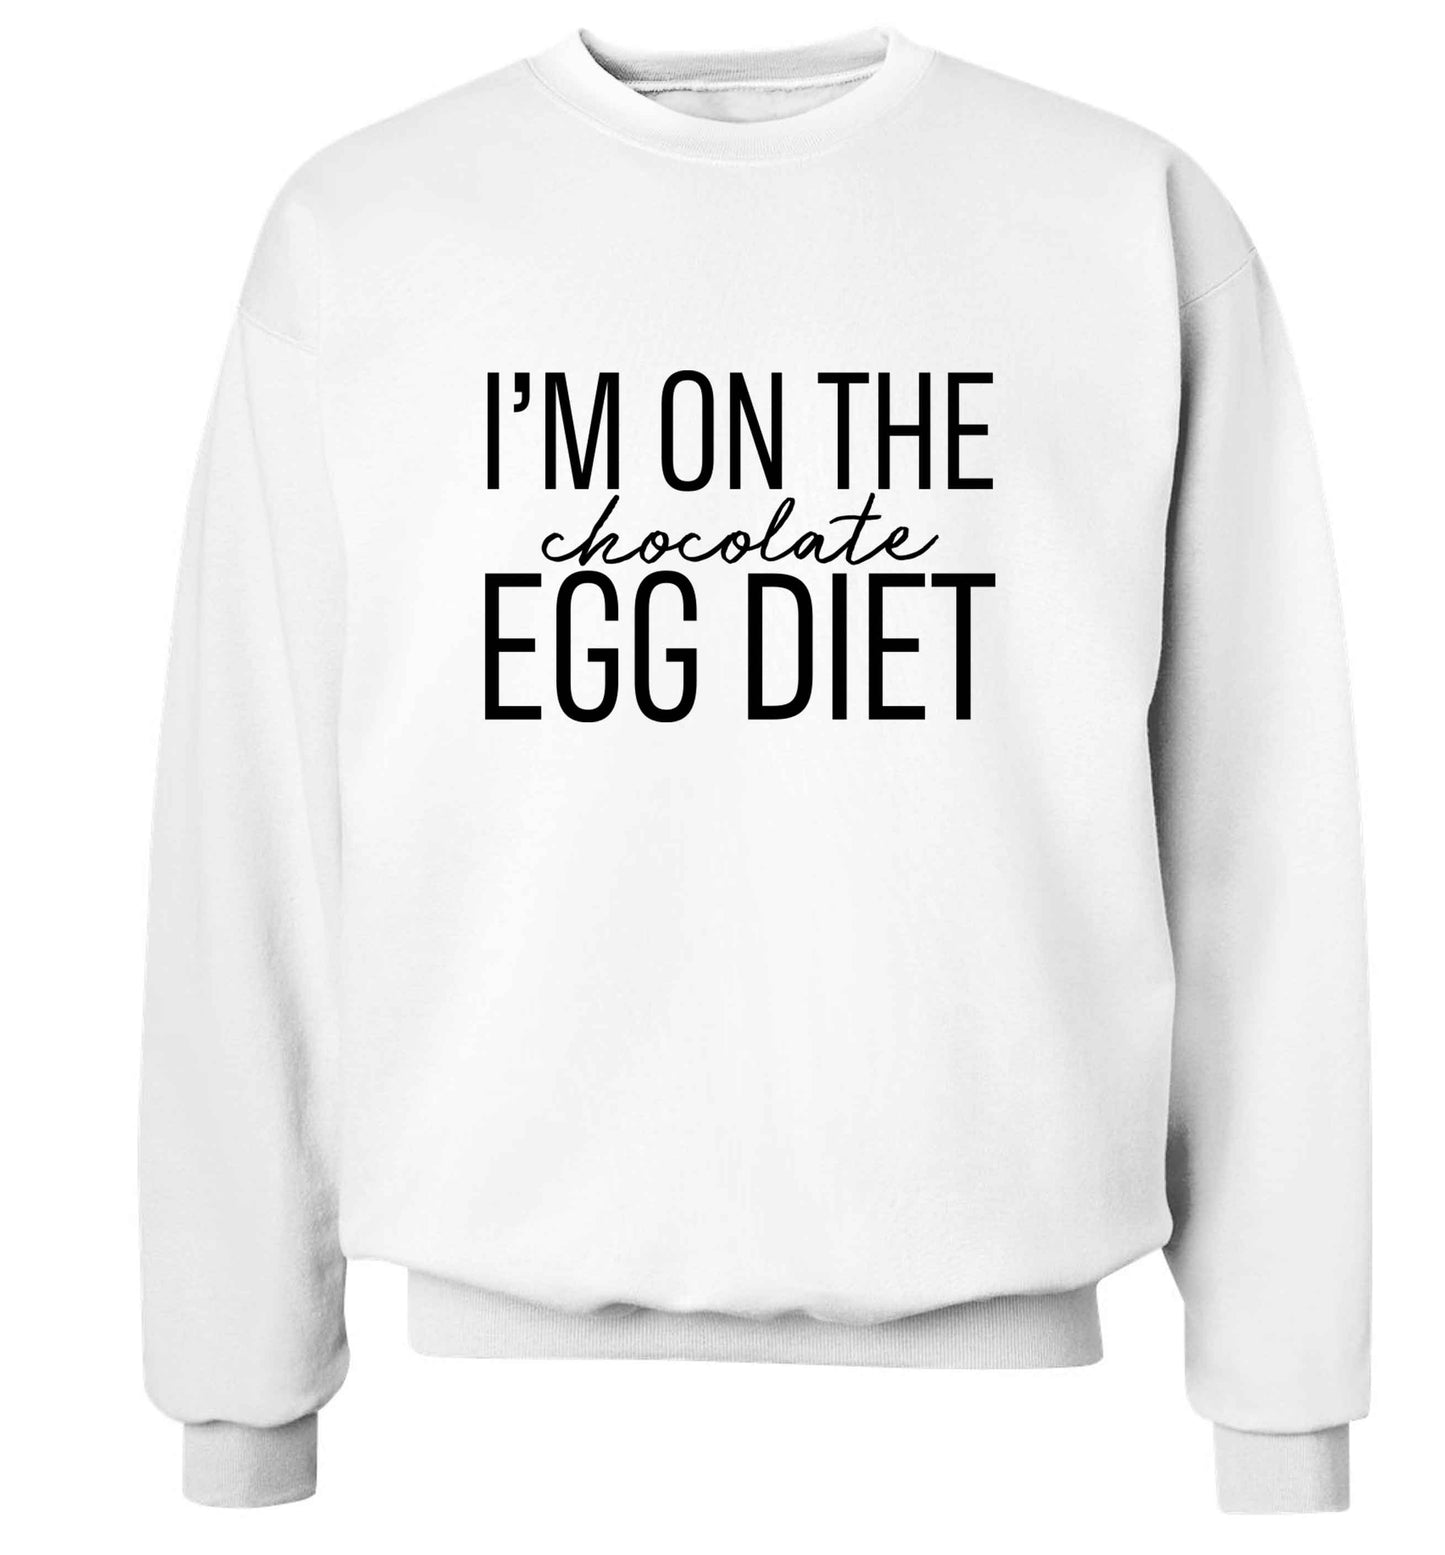 I'm on the chocolate egg diet adult's unisex white sweater 2XL